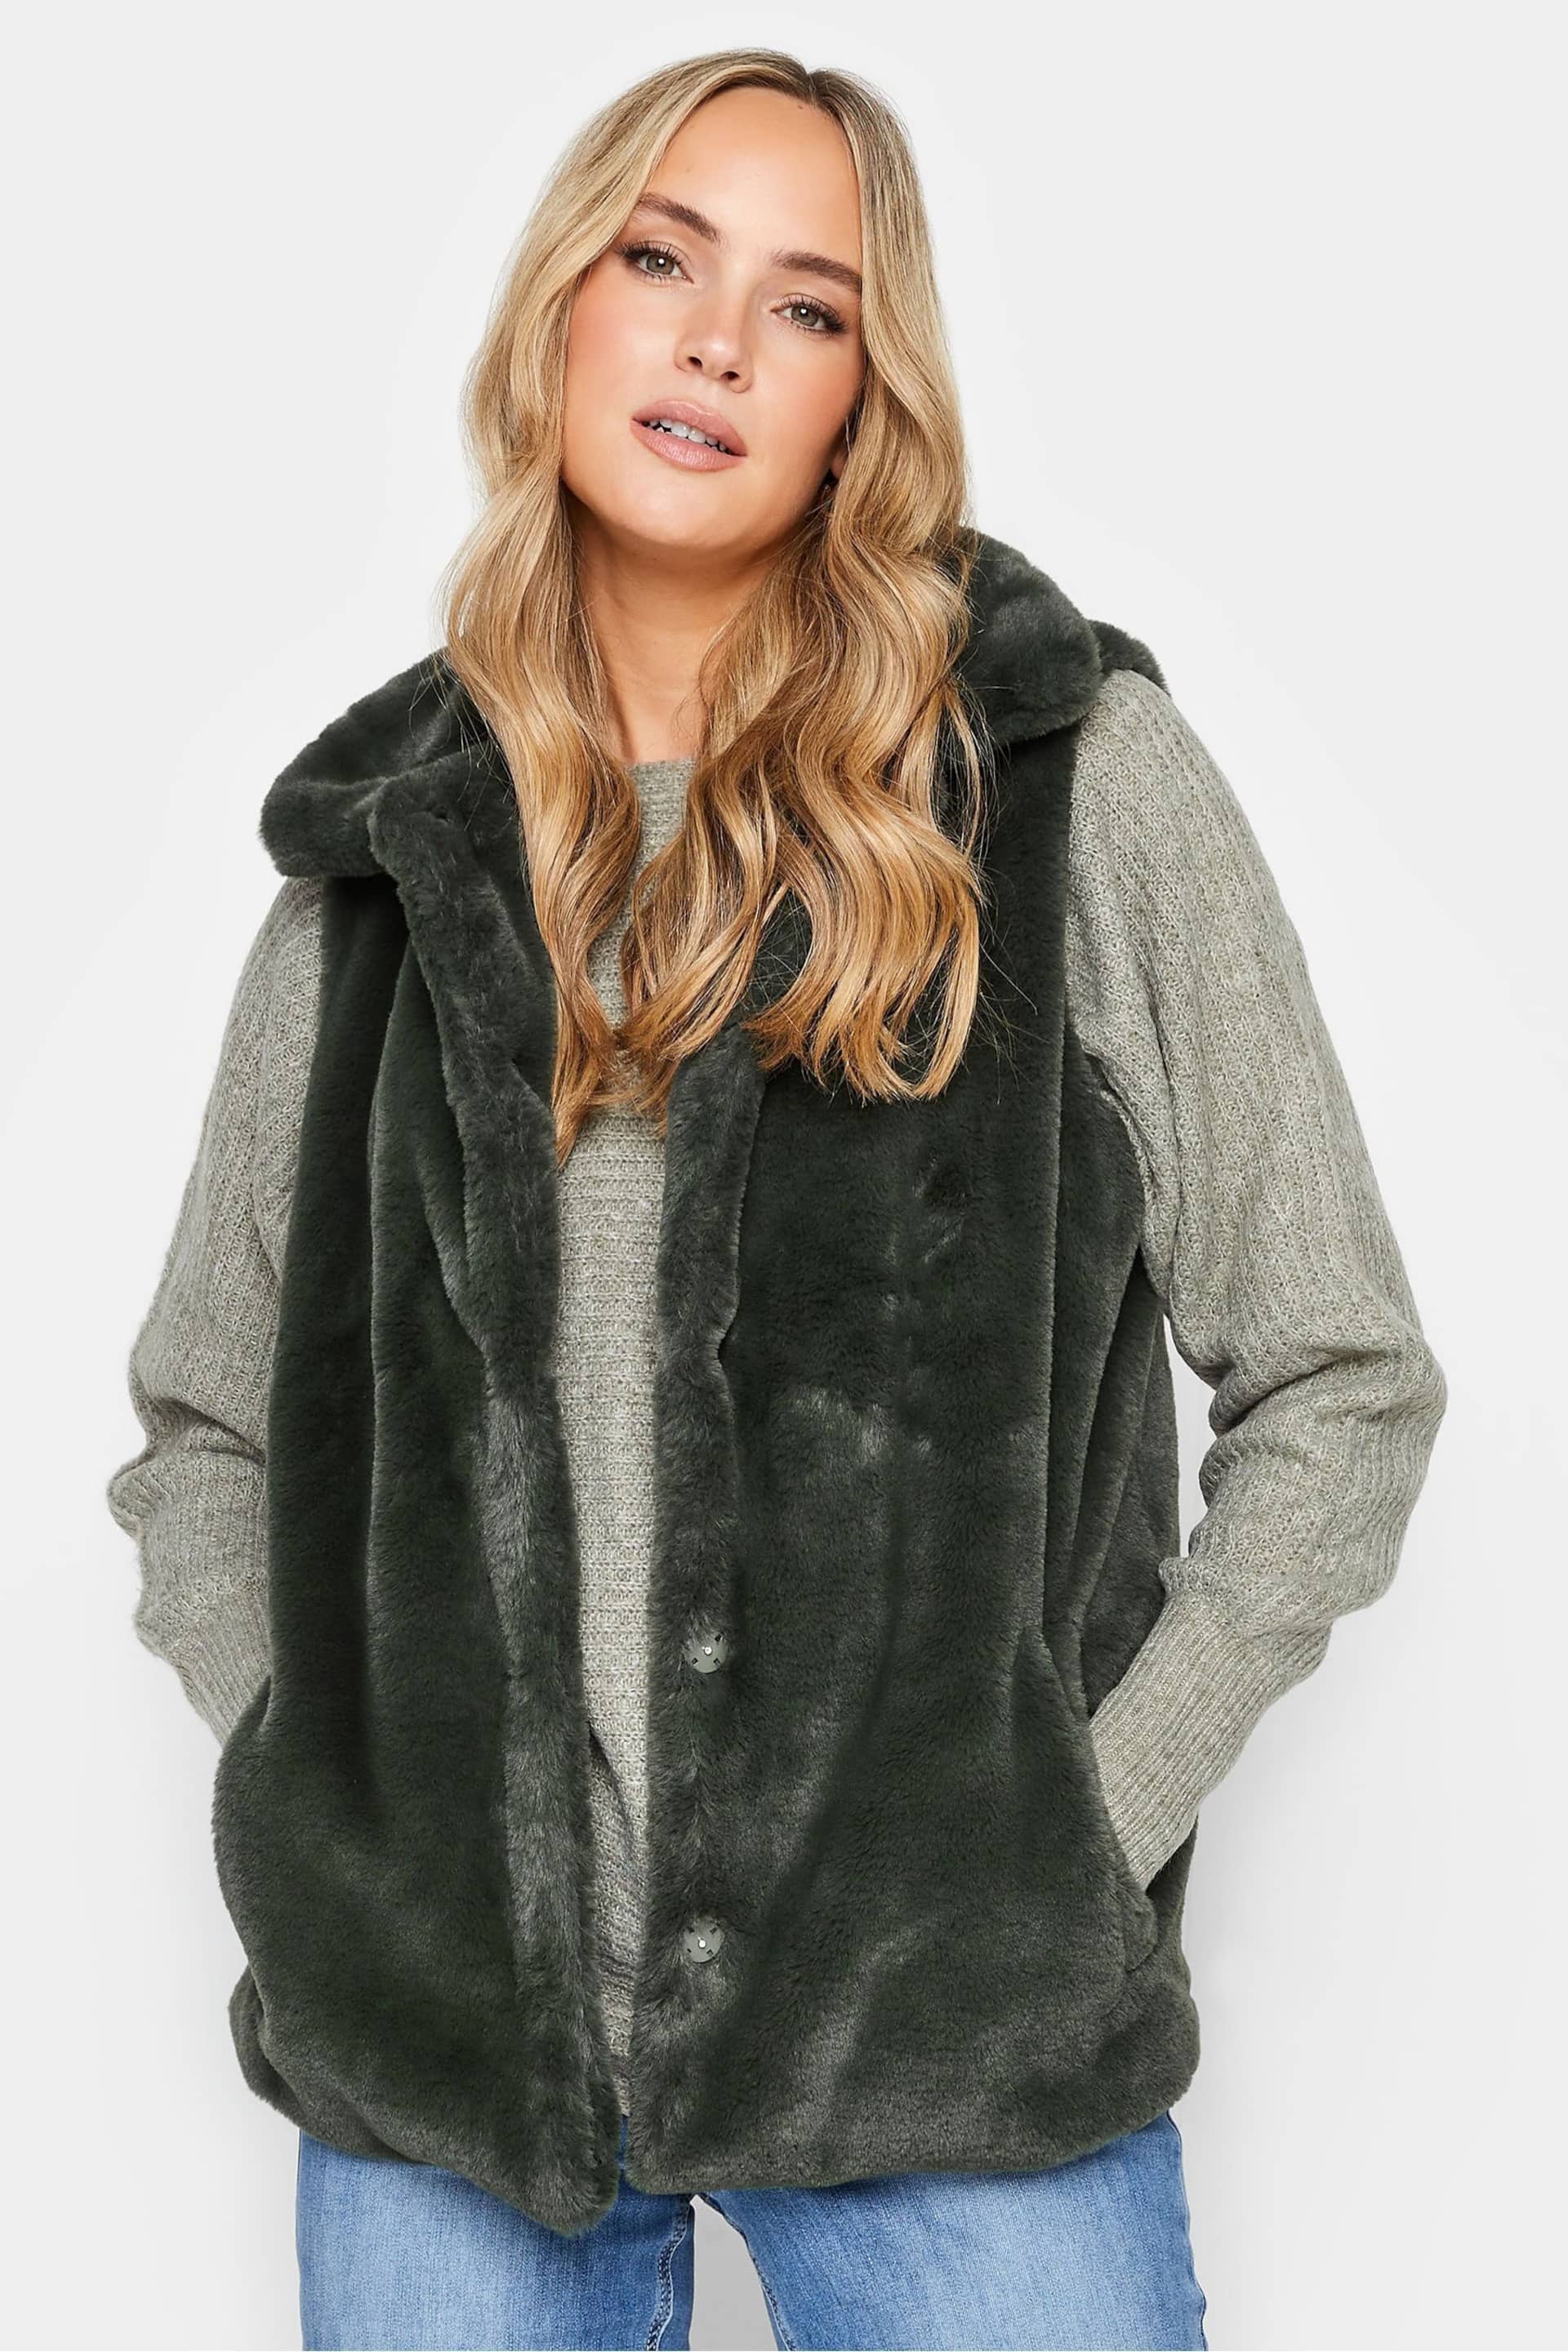 Long Tall Sally Green Faux Fur Gilet - Image 1 of 4